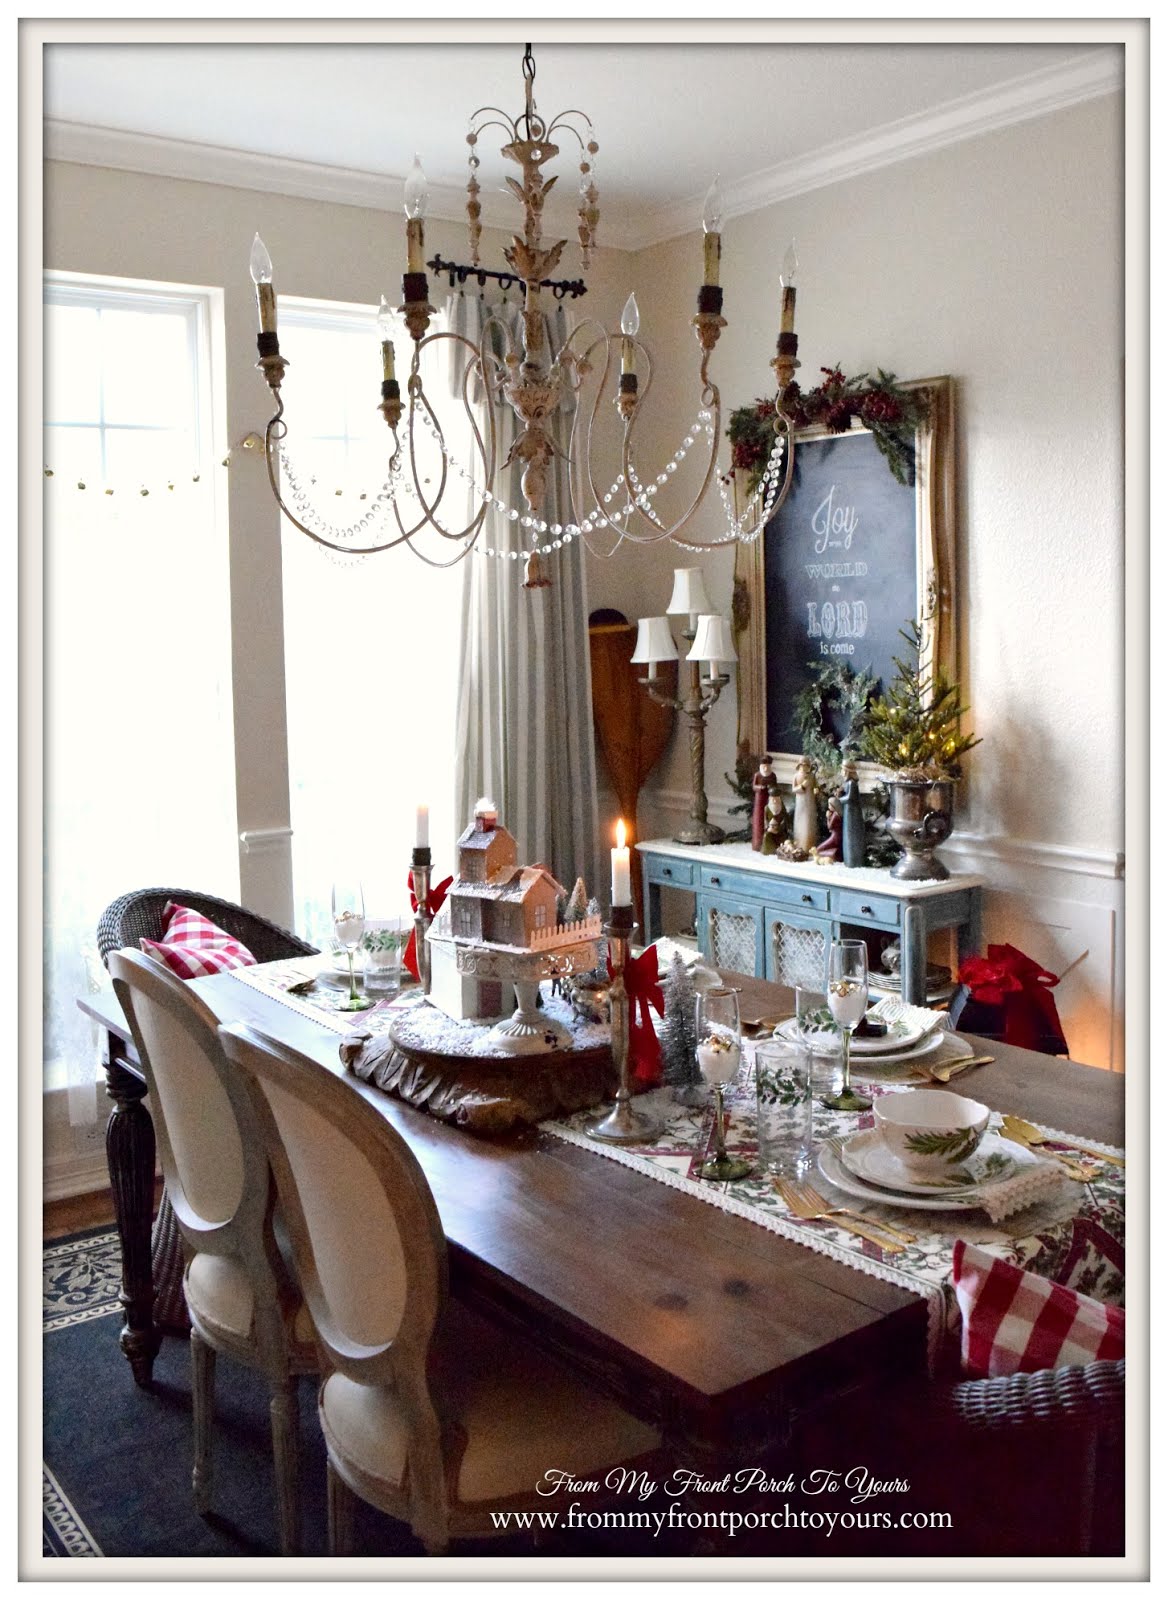 From My Front Porch To Yours: Farmhouse Christmas Dining Room